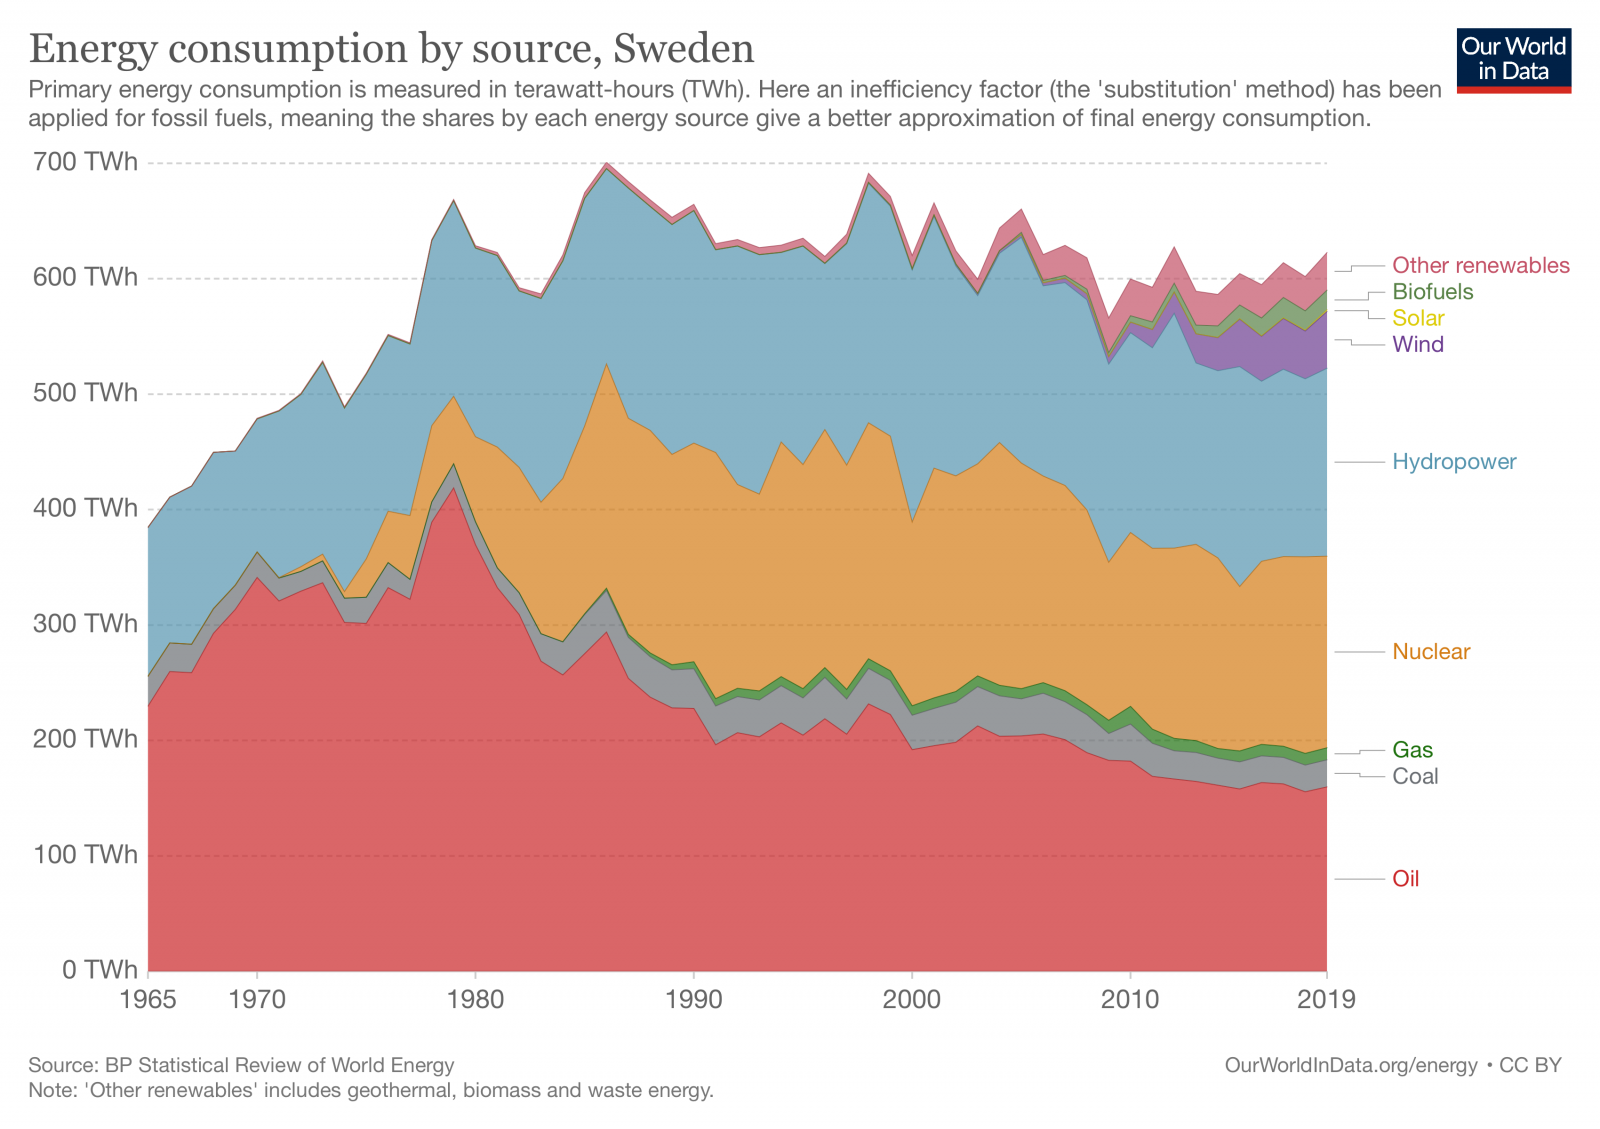 Our World in Data, Swedish Primary Energy Consumption